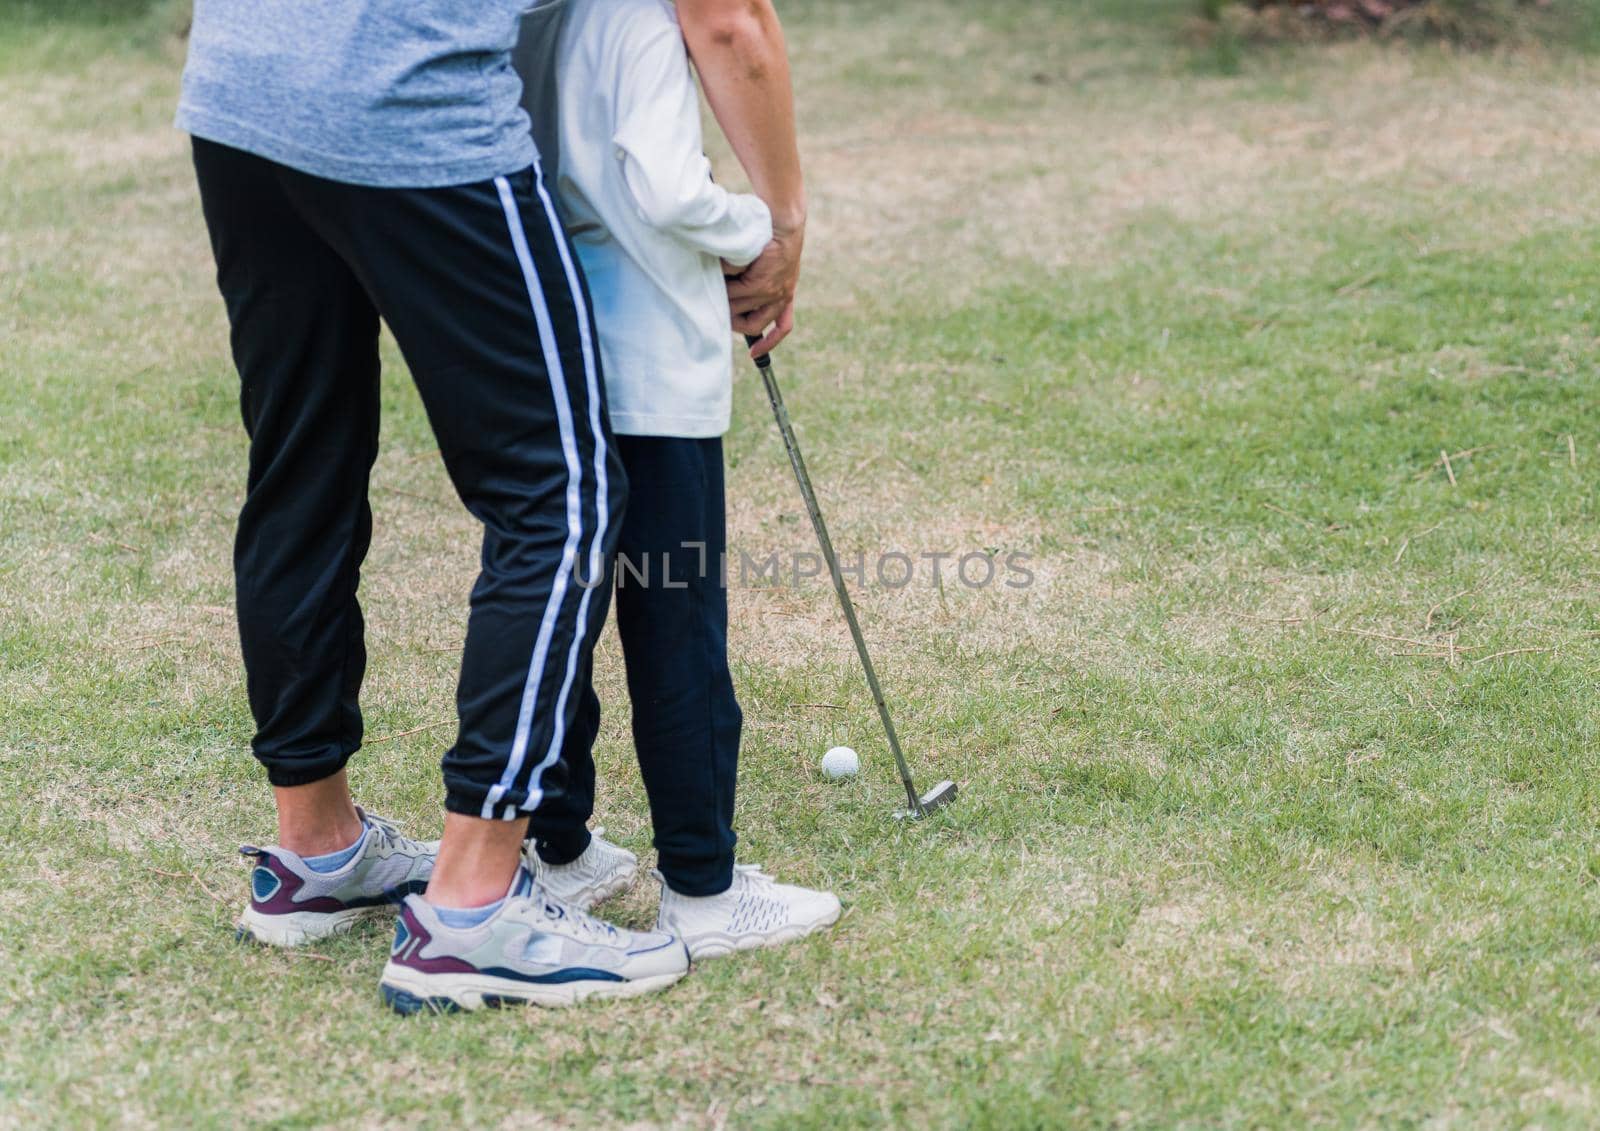 father support teaching training daughter to play perfect golf by Sorapop